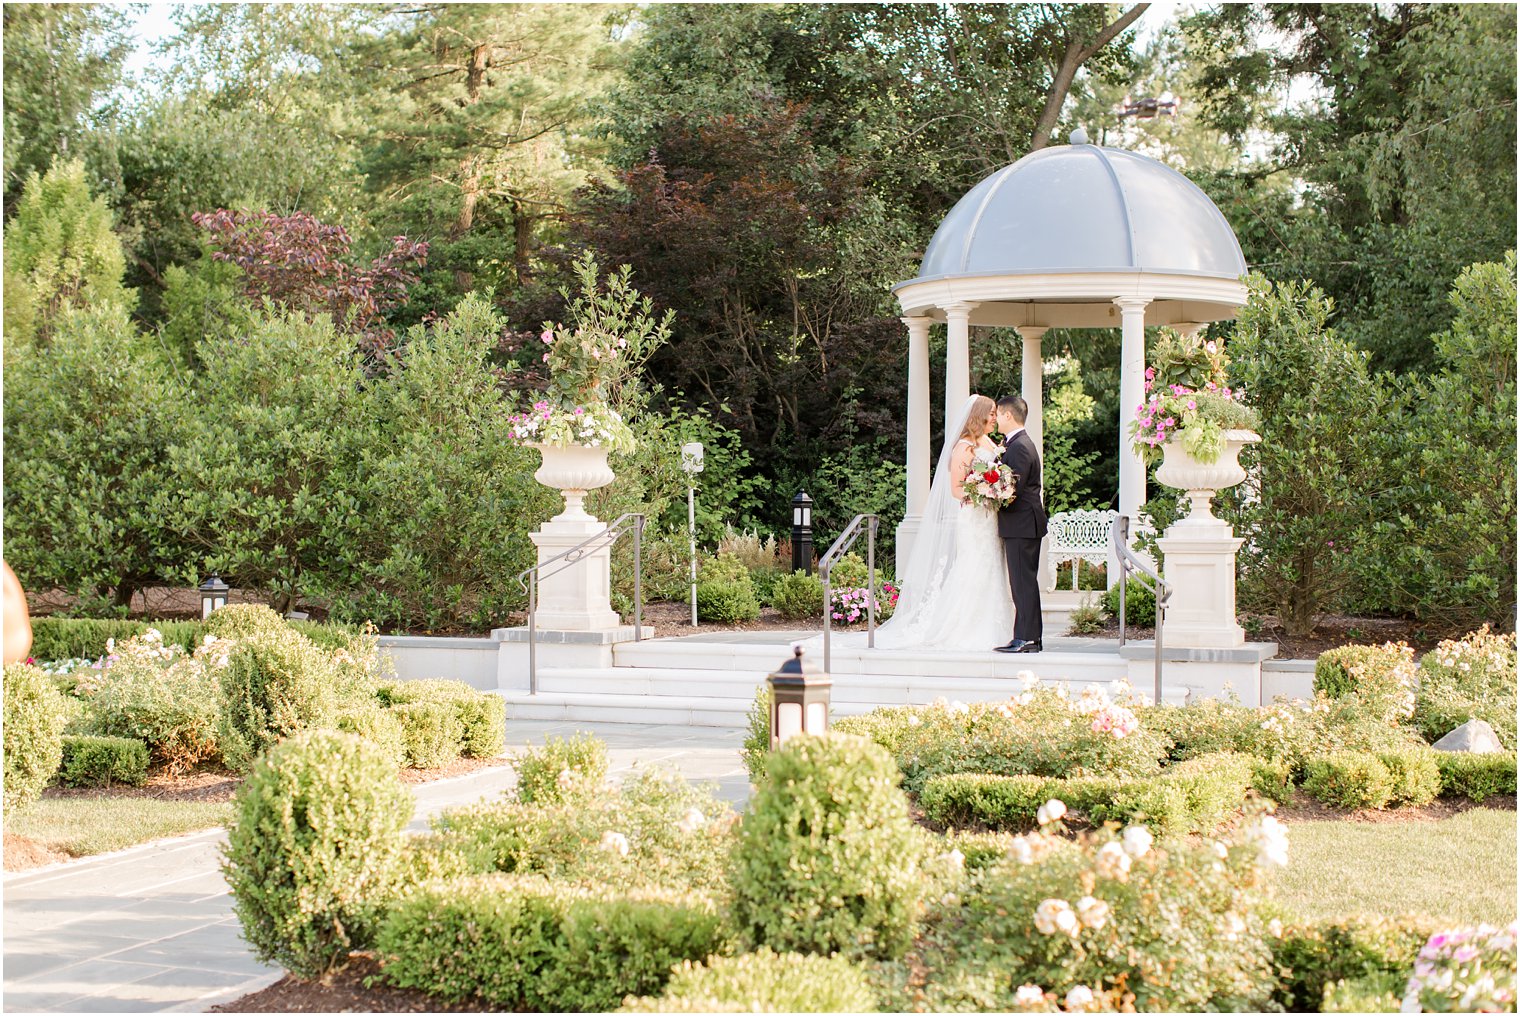 Bride and groom portrait in gardens at Park Chateau